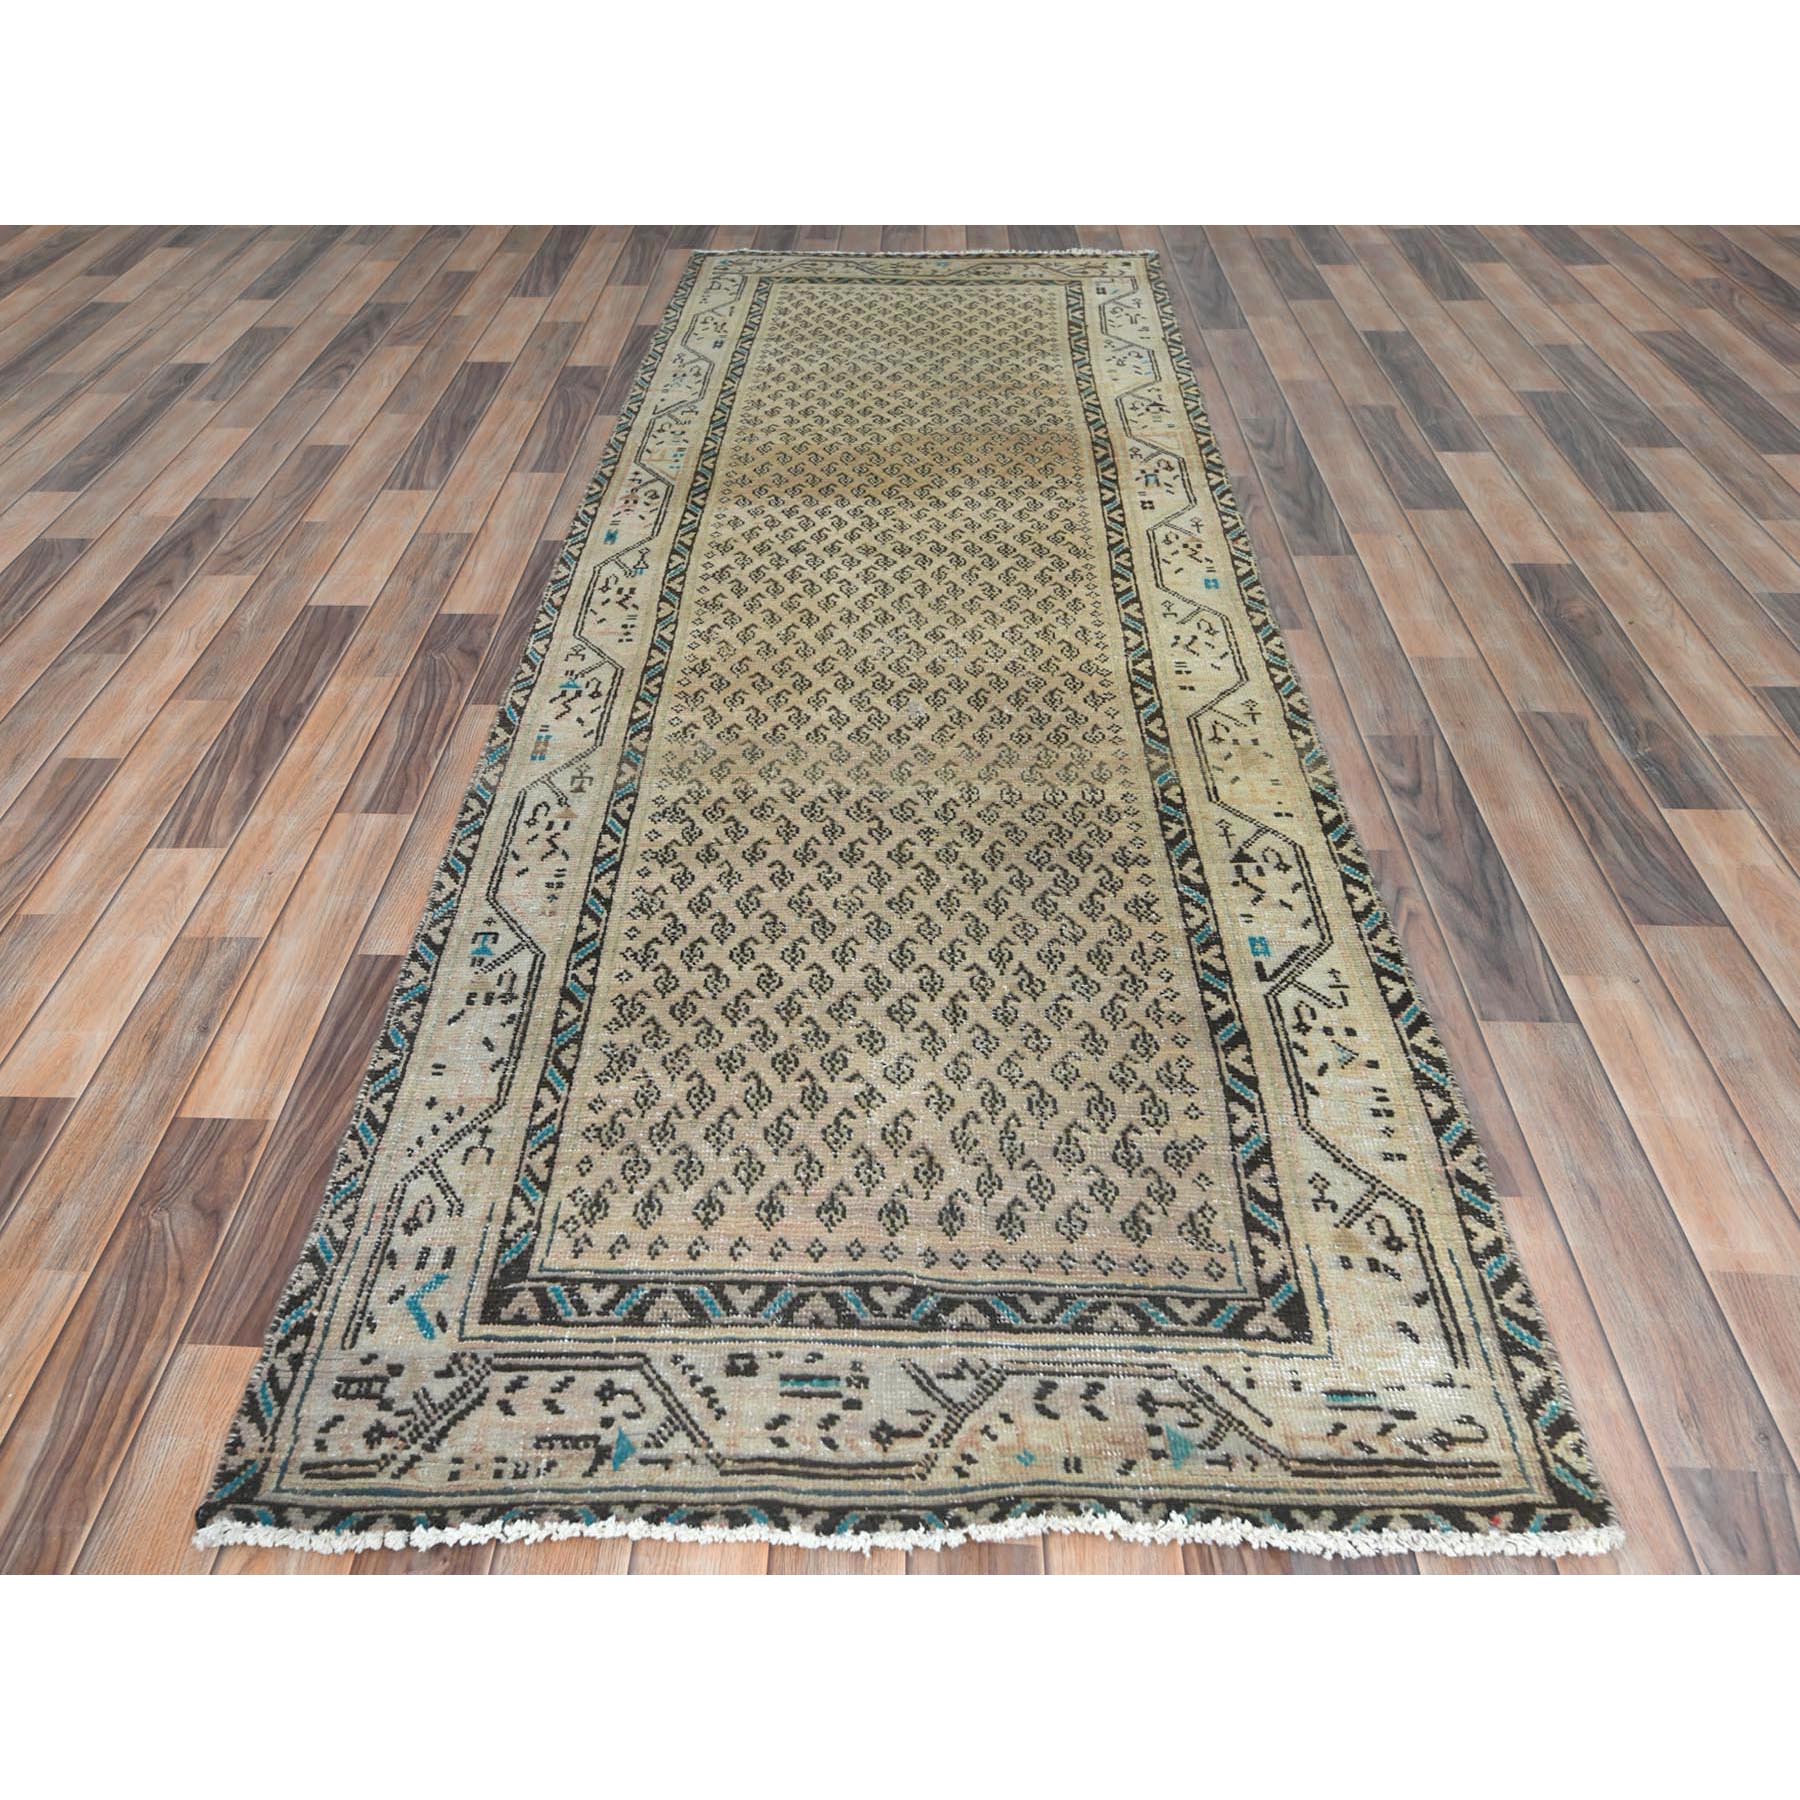 3'4"x10' Light Beige with Touches of Chocolate Brown, Small Repetitive Boteh Design Vintage Persian Serab, Abrash, Hand Woven, Cropped Thin, Distressed, Pure Wool Wide Runner Oriental Rug 